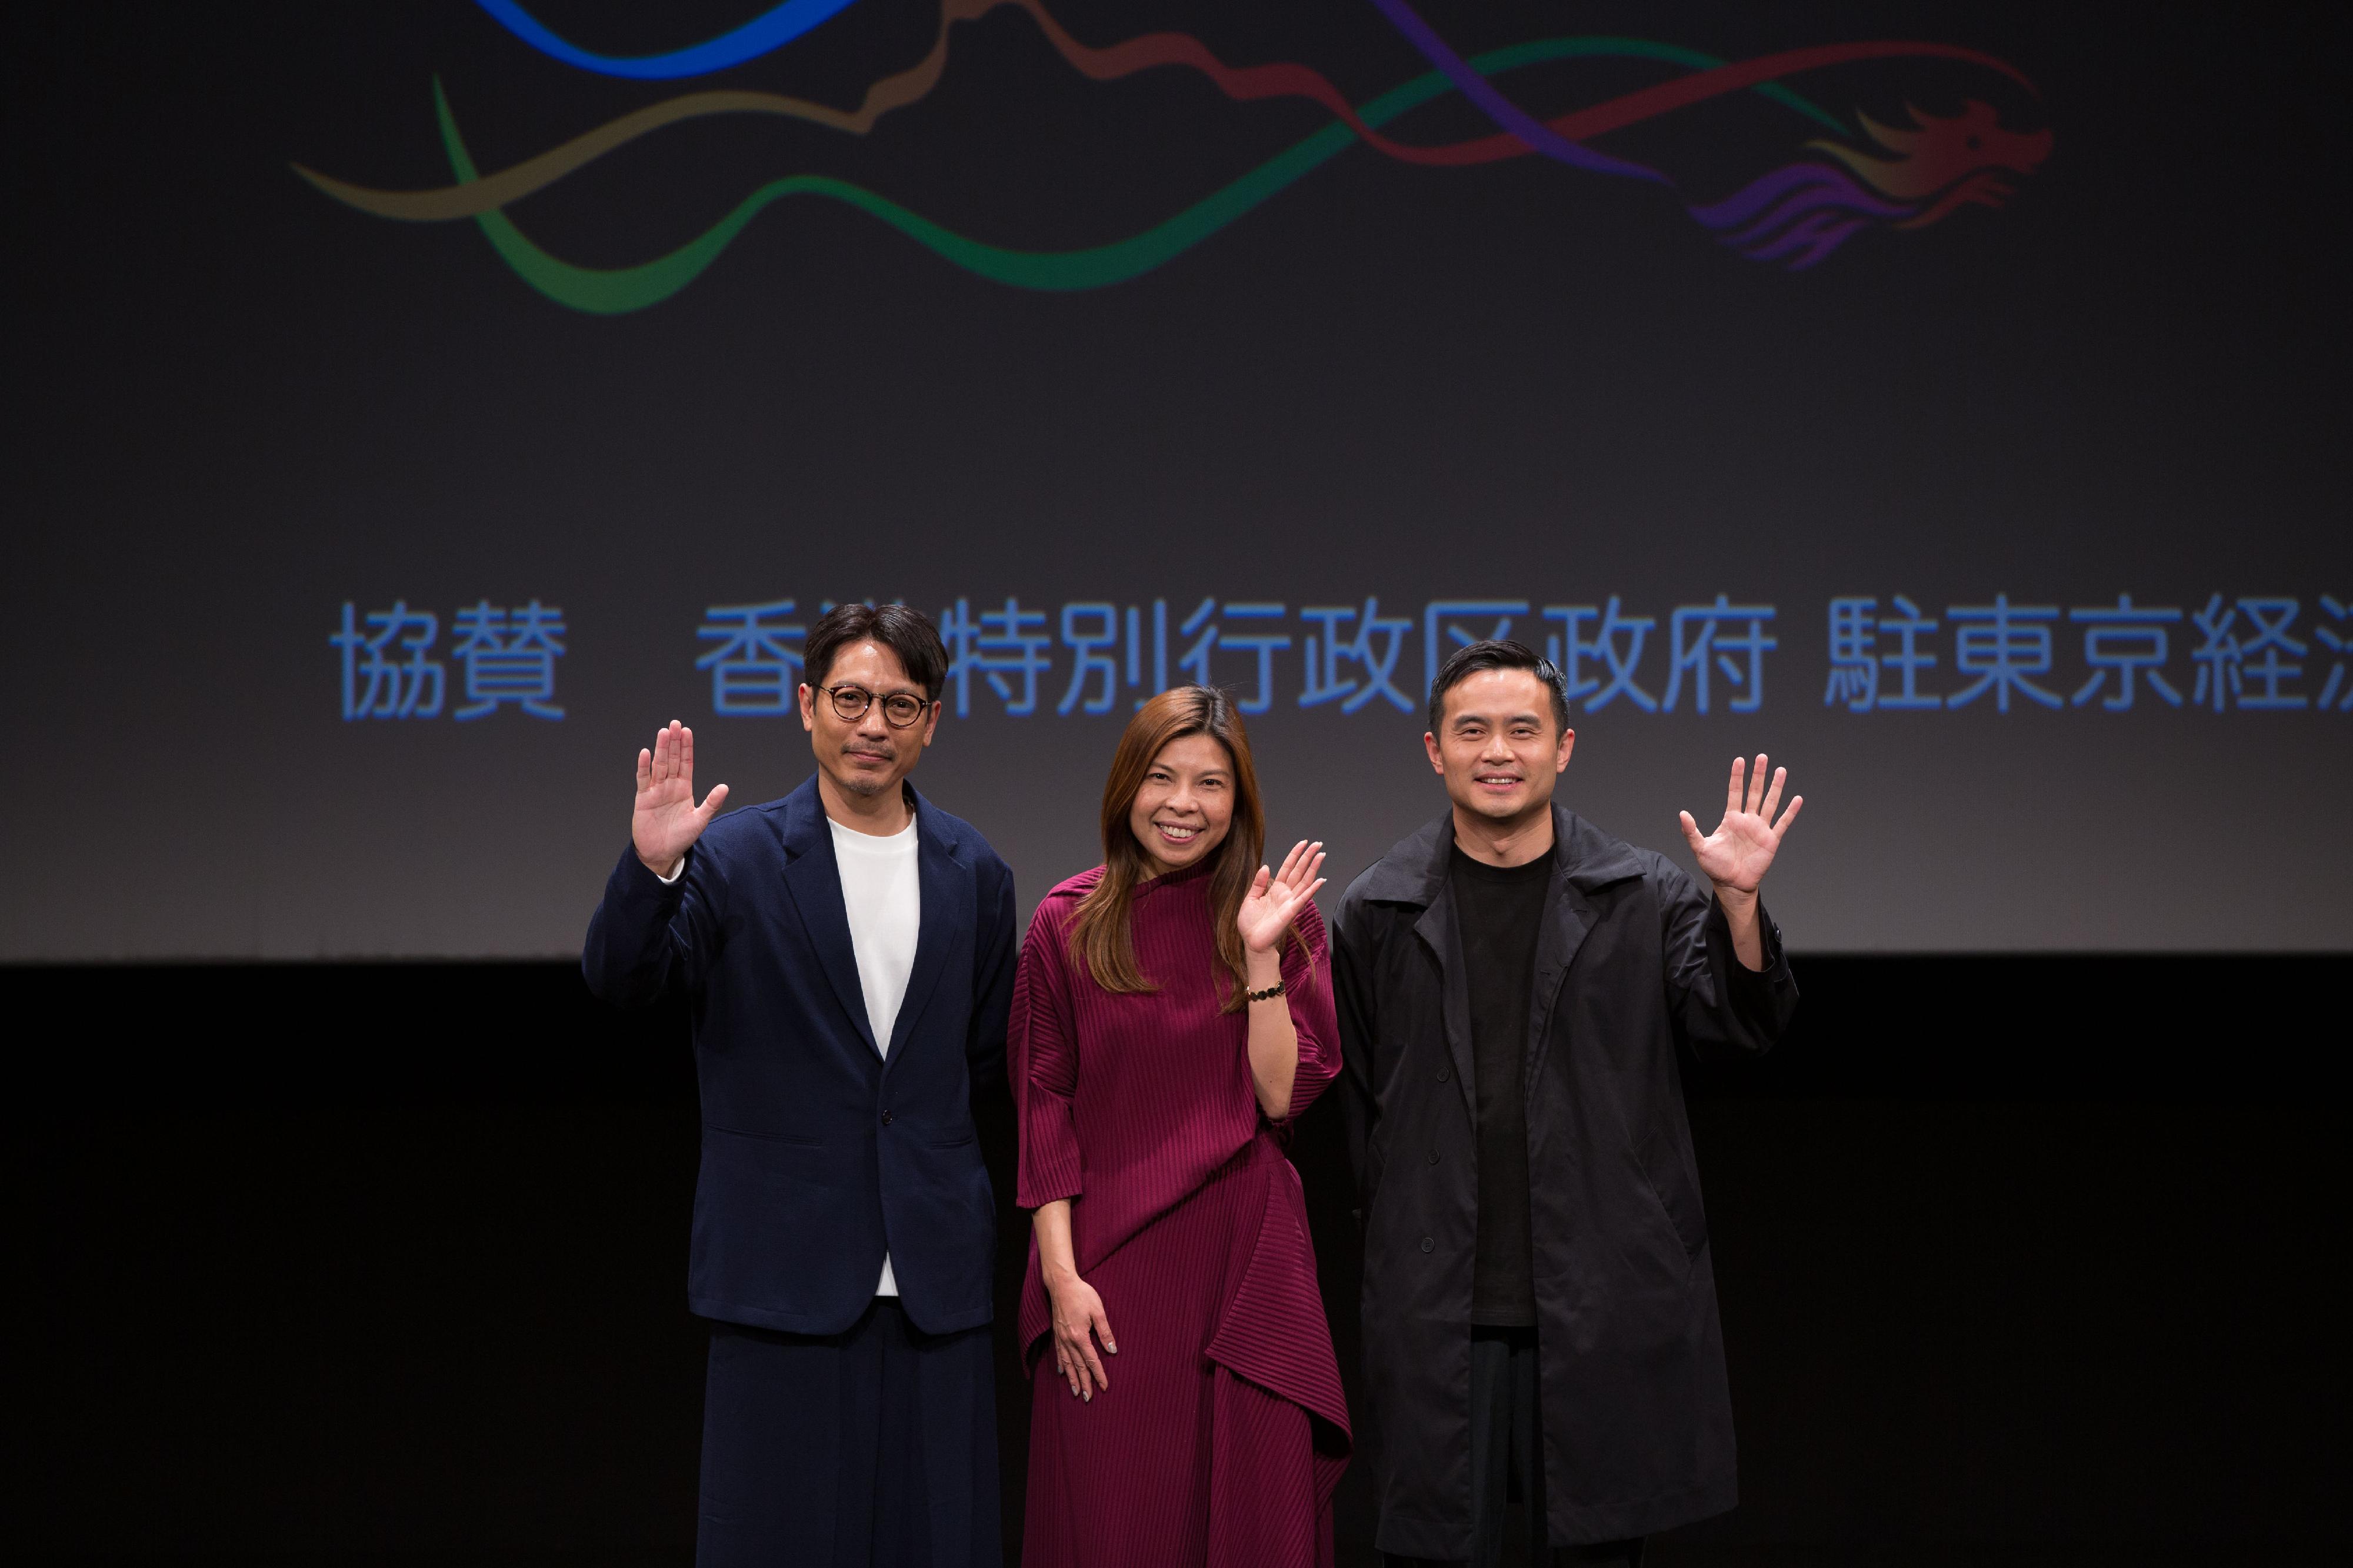 The "Hong Kong Gala Screening" featuring the Hong Kong film "Lost Love" was held in Osaka, Japan, tonight (March 16). Photo shows the Acting Principal Hong Kong Economic and Trade Representative (Tokyo), Miss Winsome Au (centre); director Ka Sing-fung (right); and actor Alan Luk (left), of "Lost Love" before the screening.